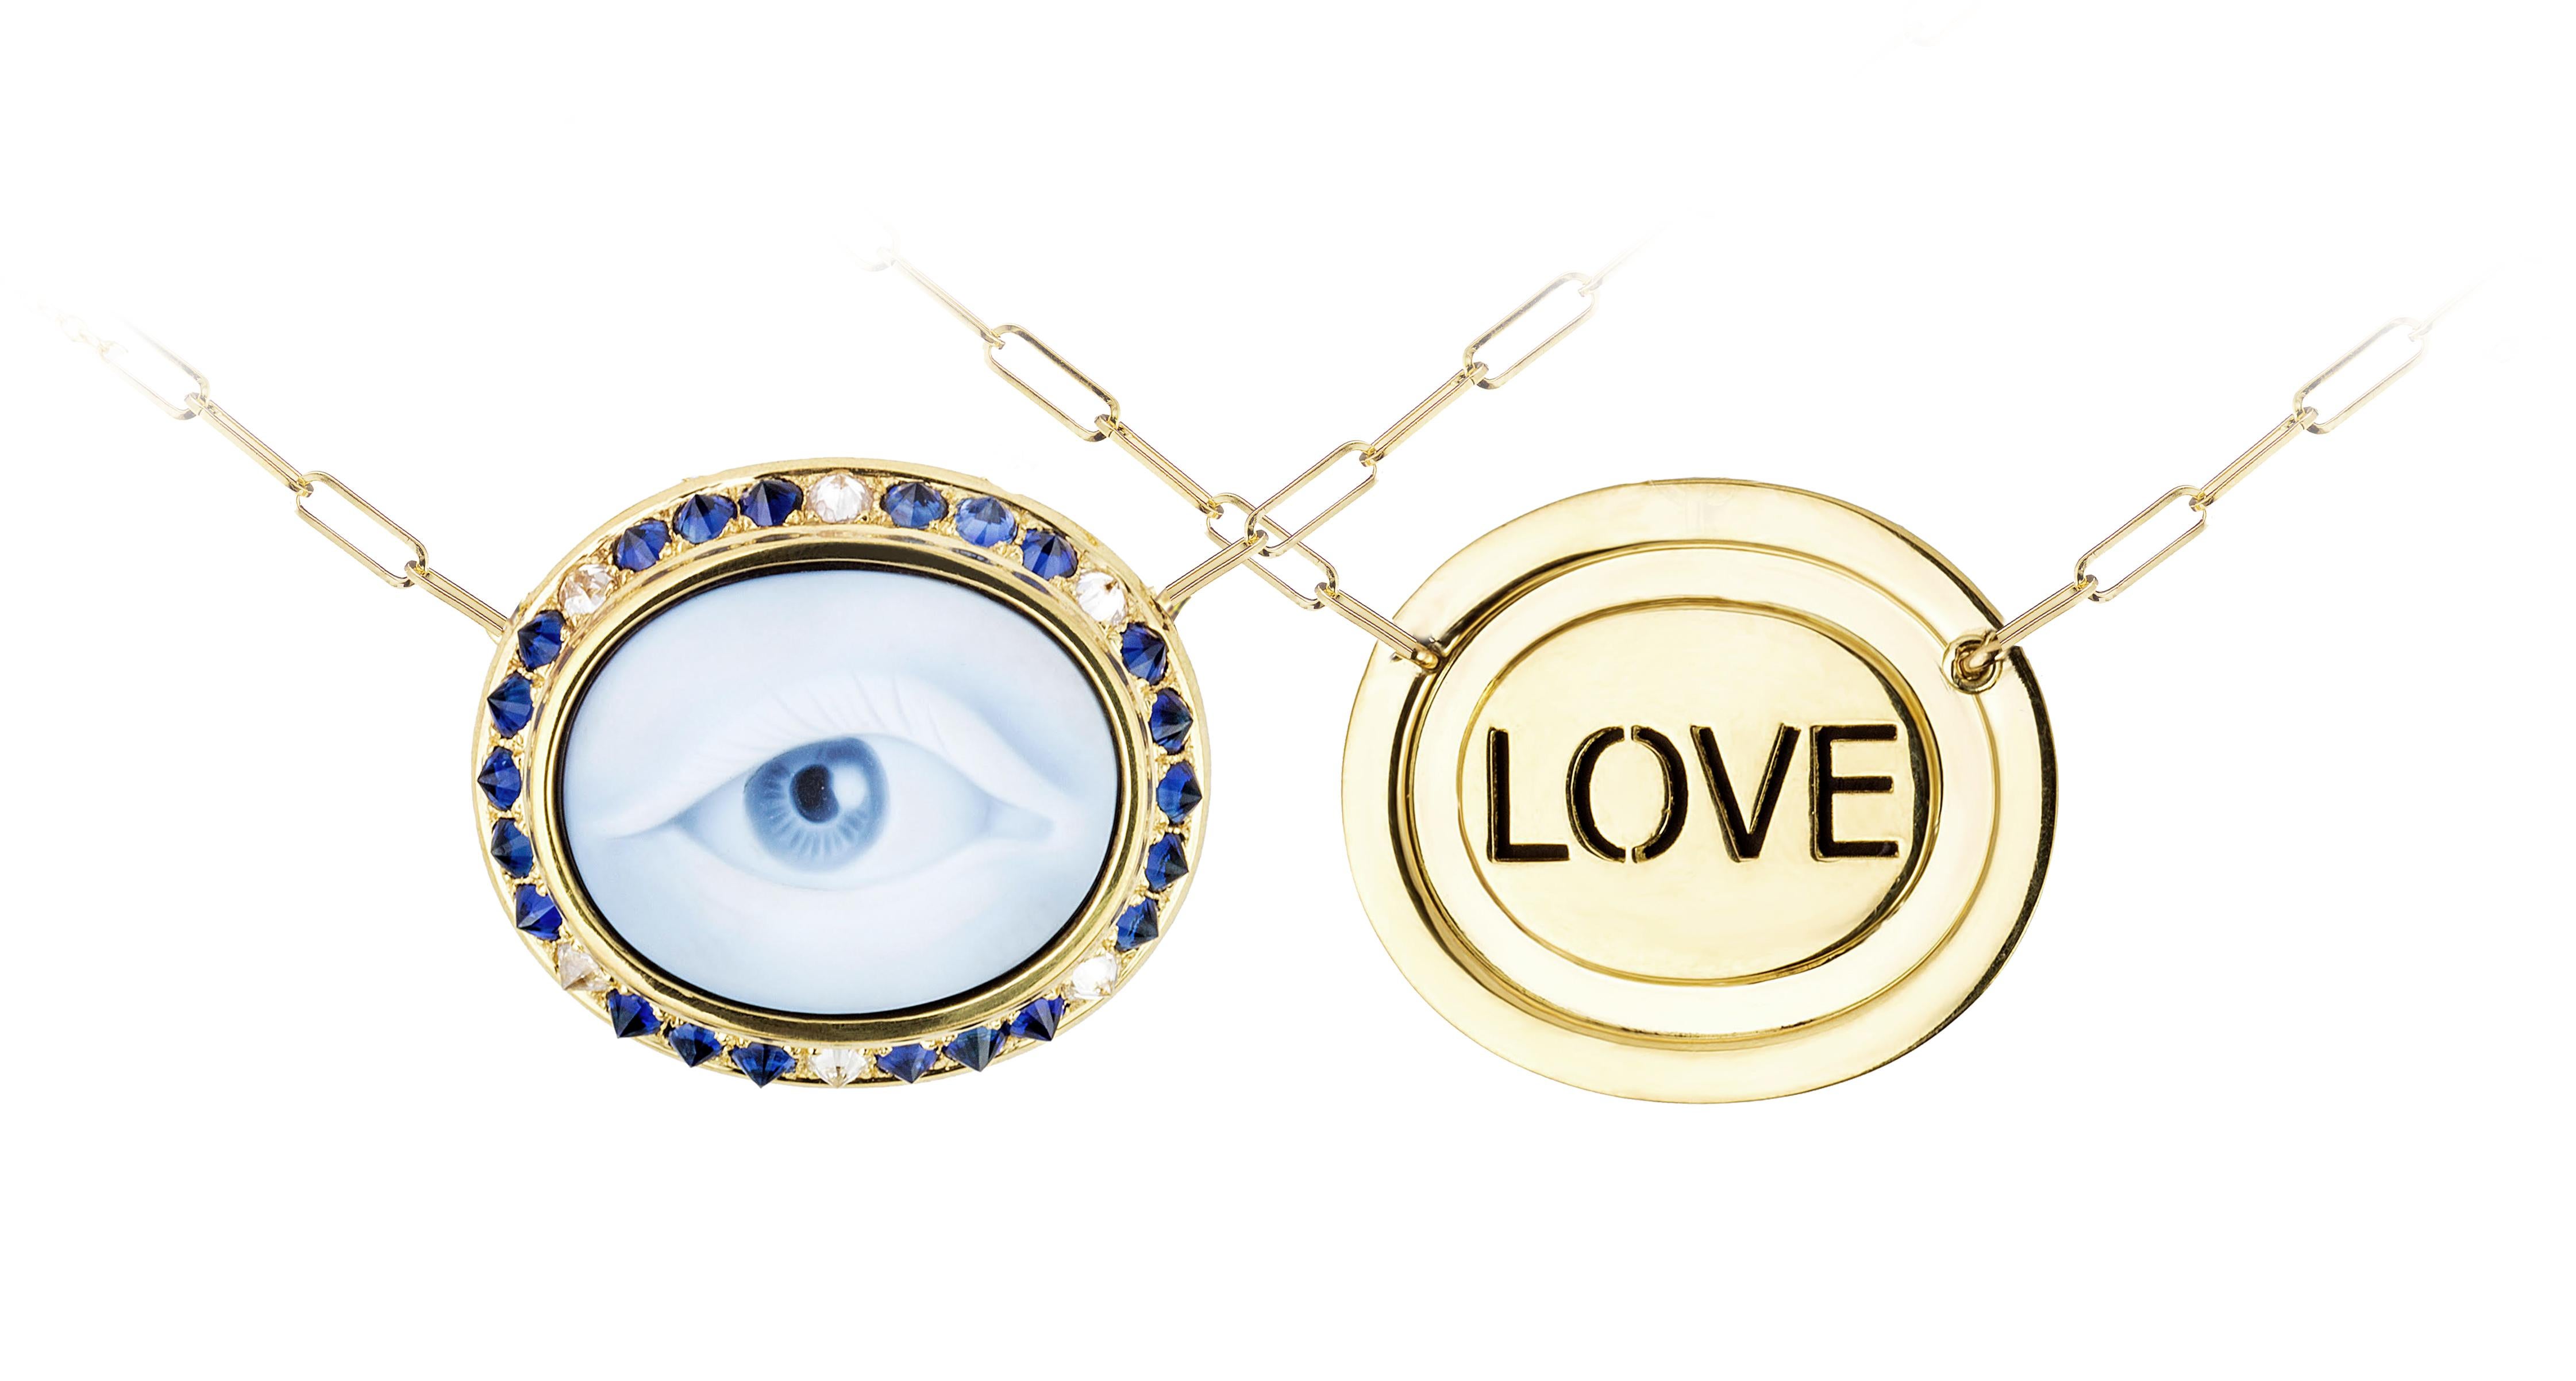 The blue agate cameo is hand created by a master carver bringing out the colors and depth within the layers of the stone. The cameo is encased in yellow gold, inverted diamonds, and sapphires. On each Eye Love Cameo necklace, ‘LOVE’ is found on the